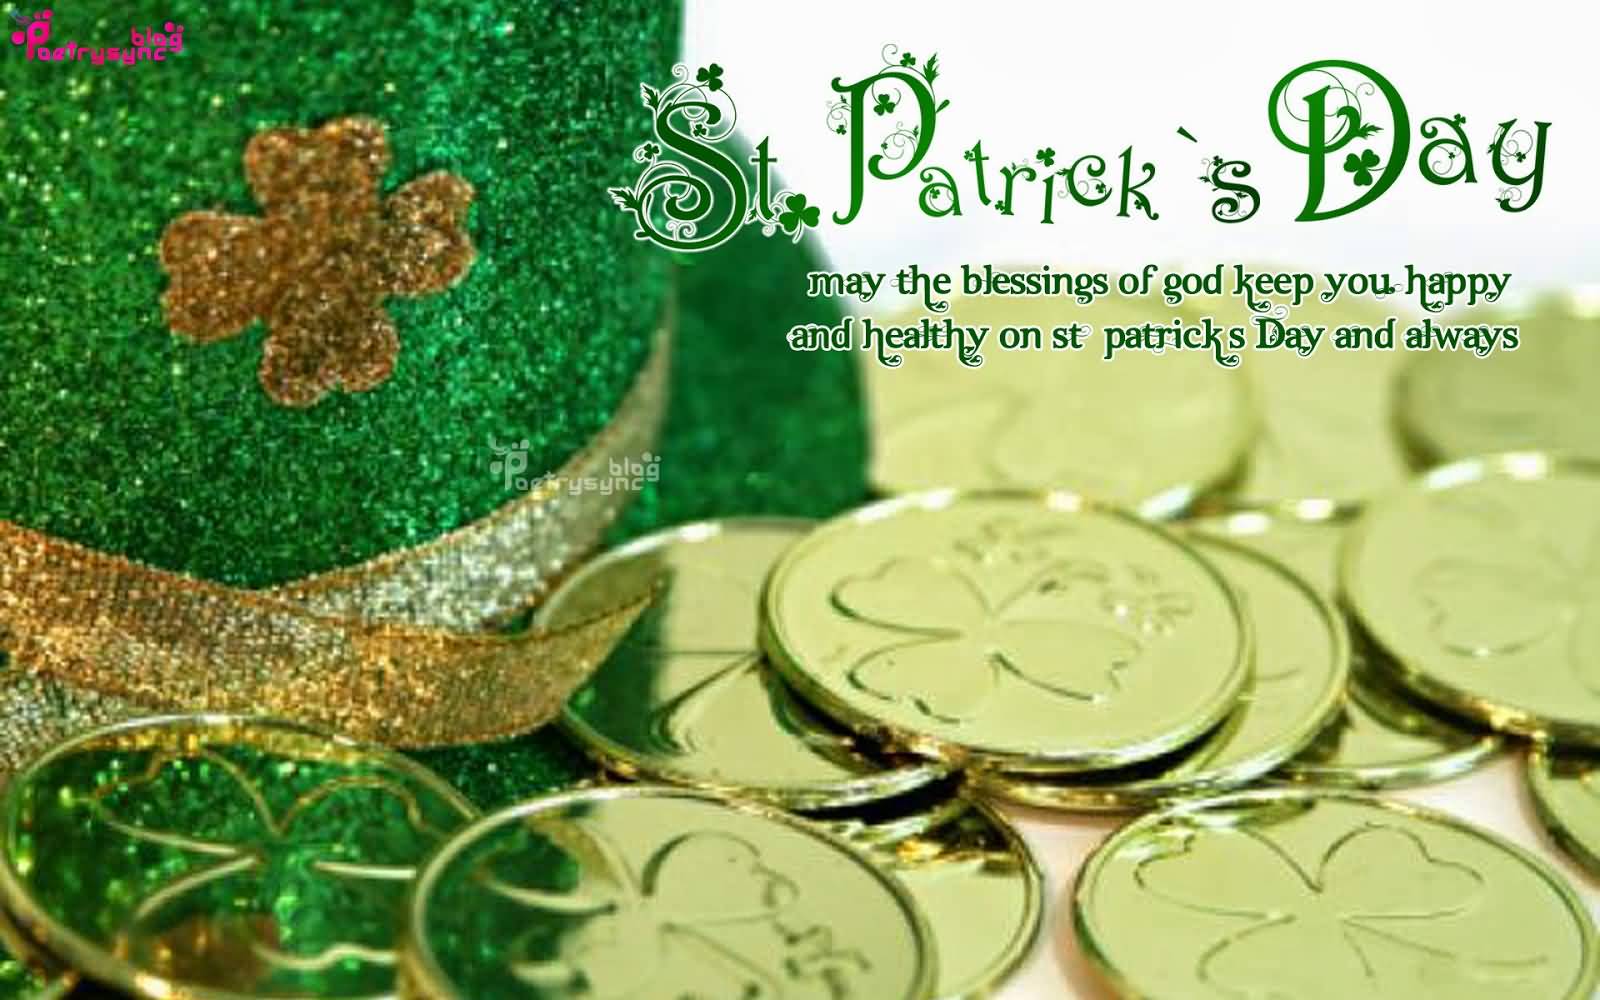 Saint Patrick’s Day May The Blessingsg Of God Keep You Happy And Healthy On Saint Patrick’s Day And Always